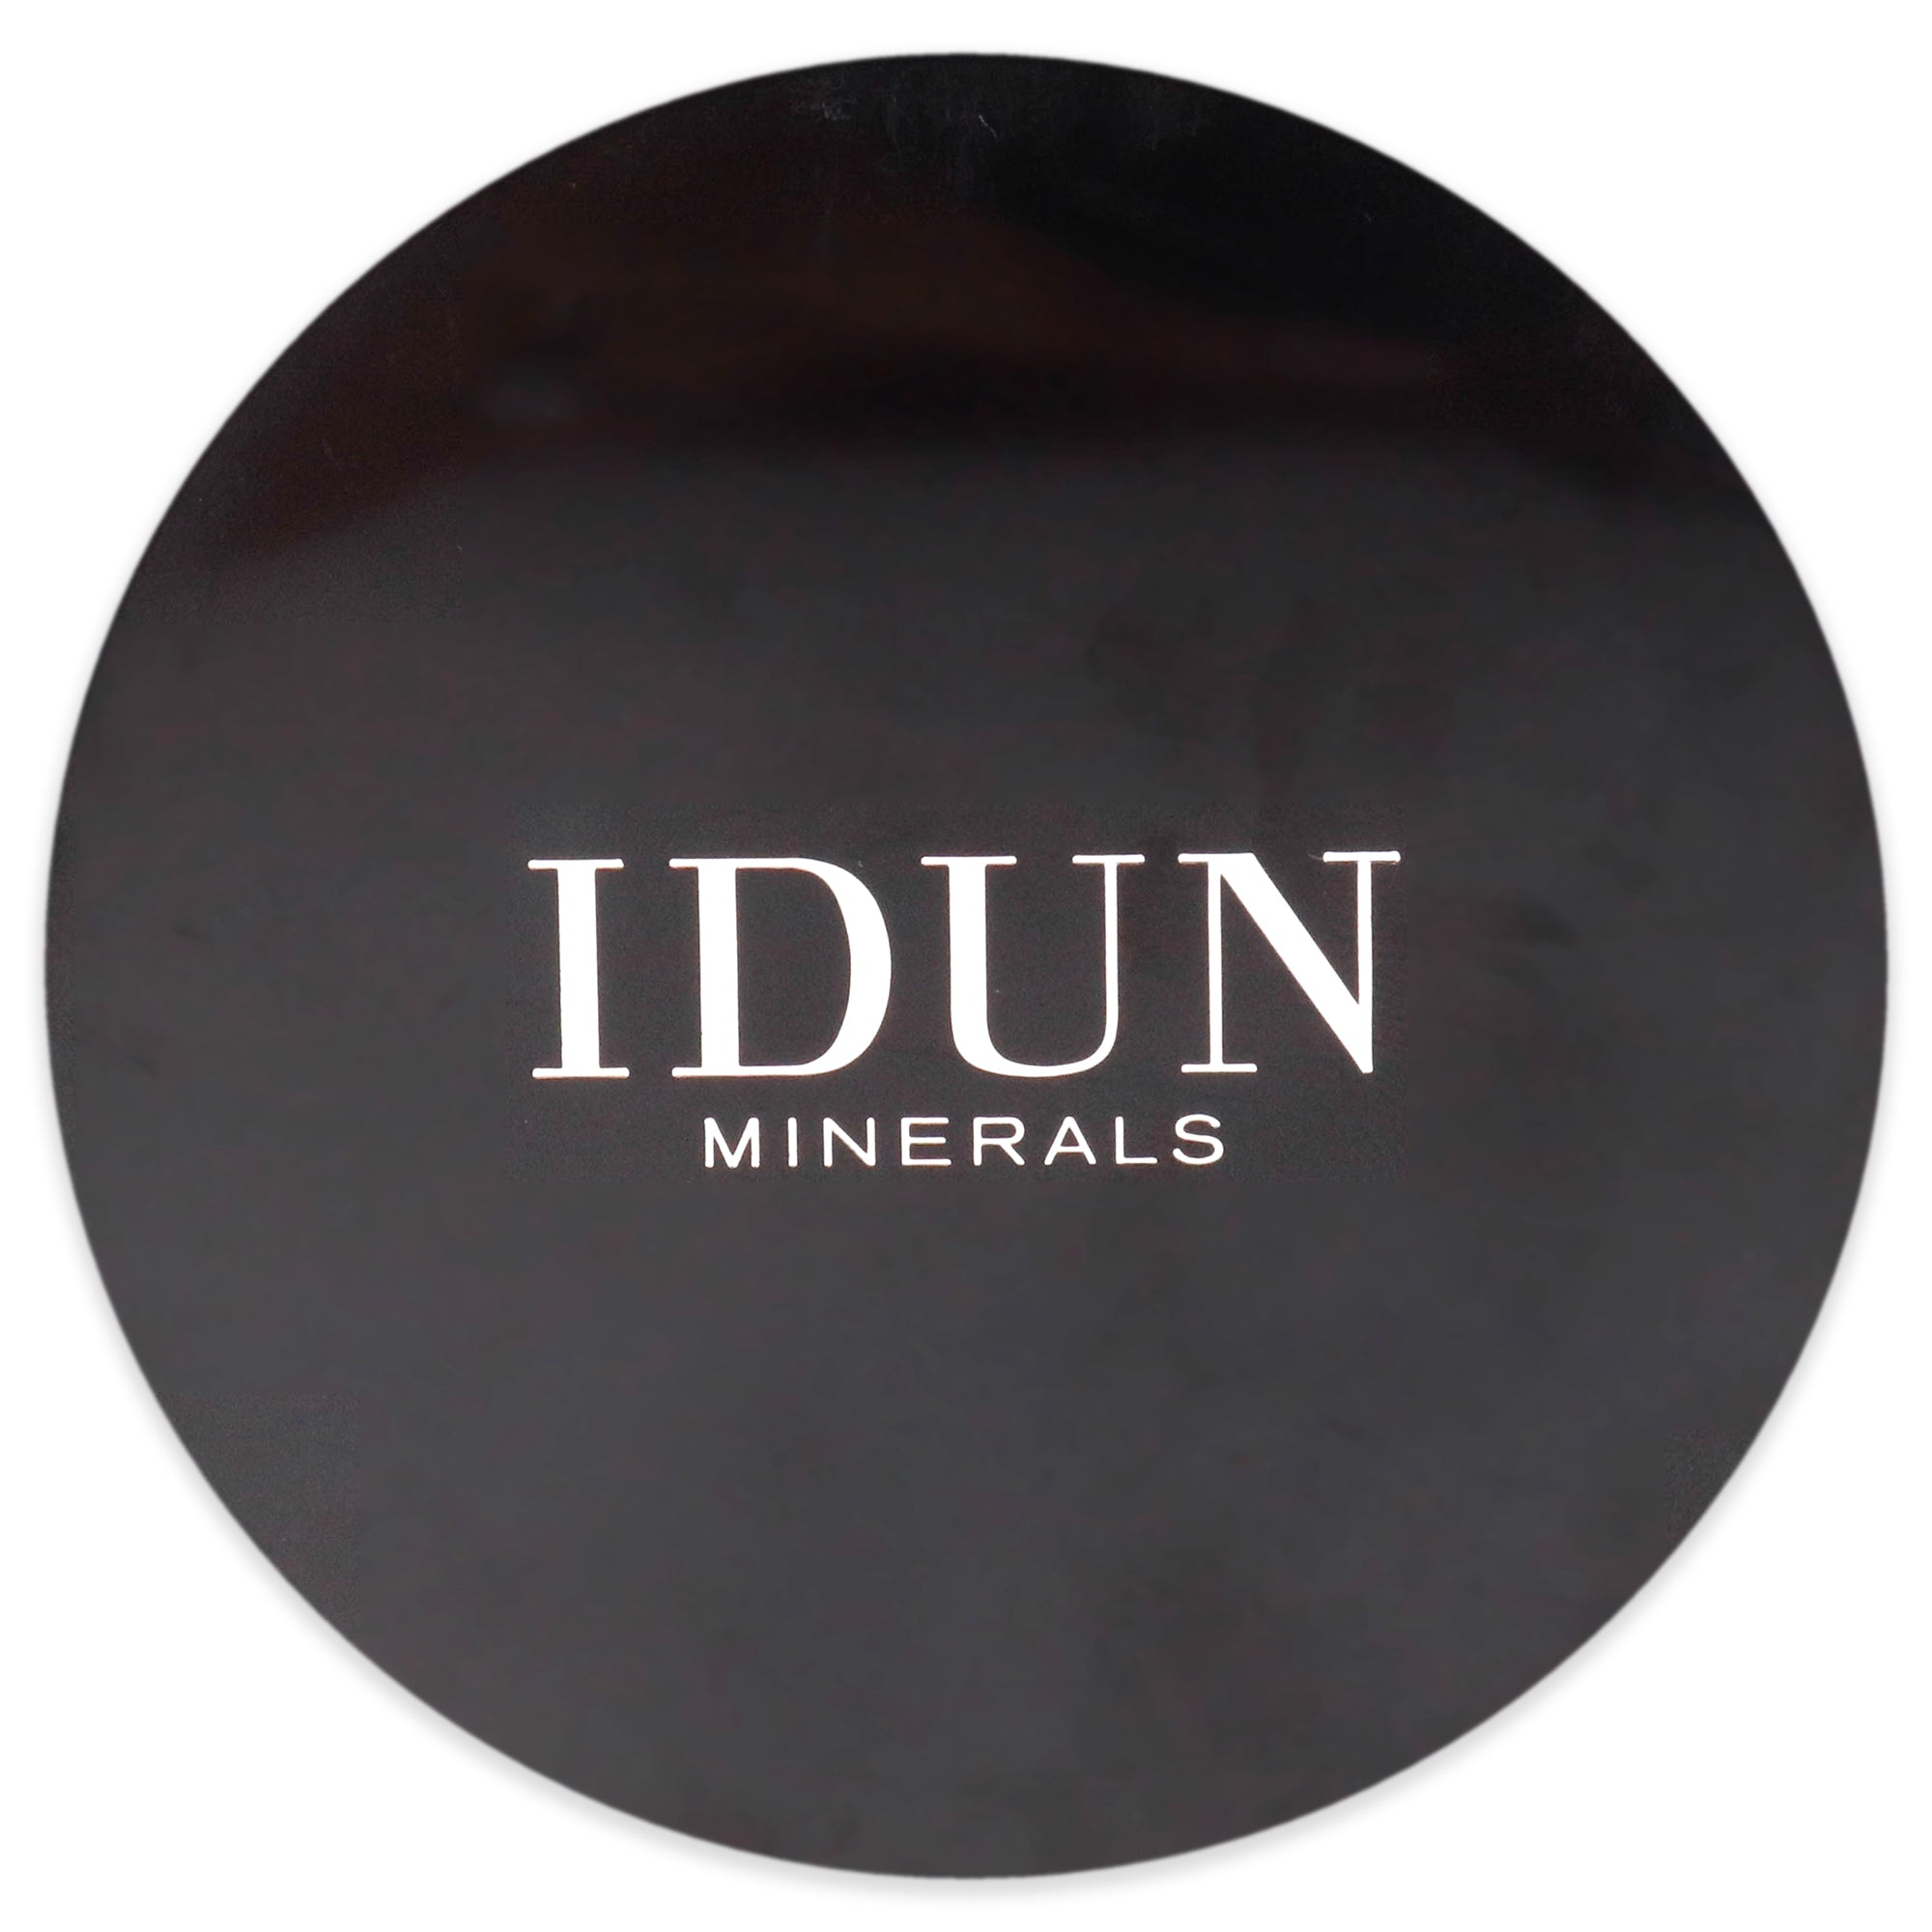 Mineral Powder Foundation SPF 15 - 037 Disa by Idun Minerals for Women - 0.25 oz Foundation